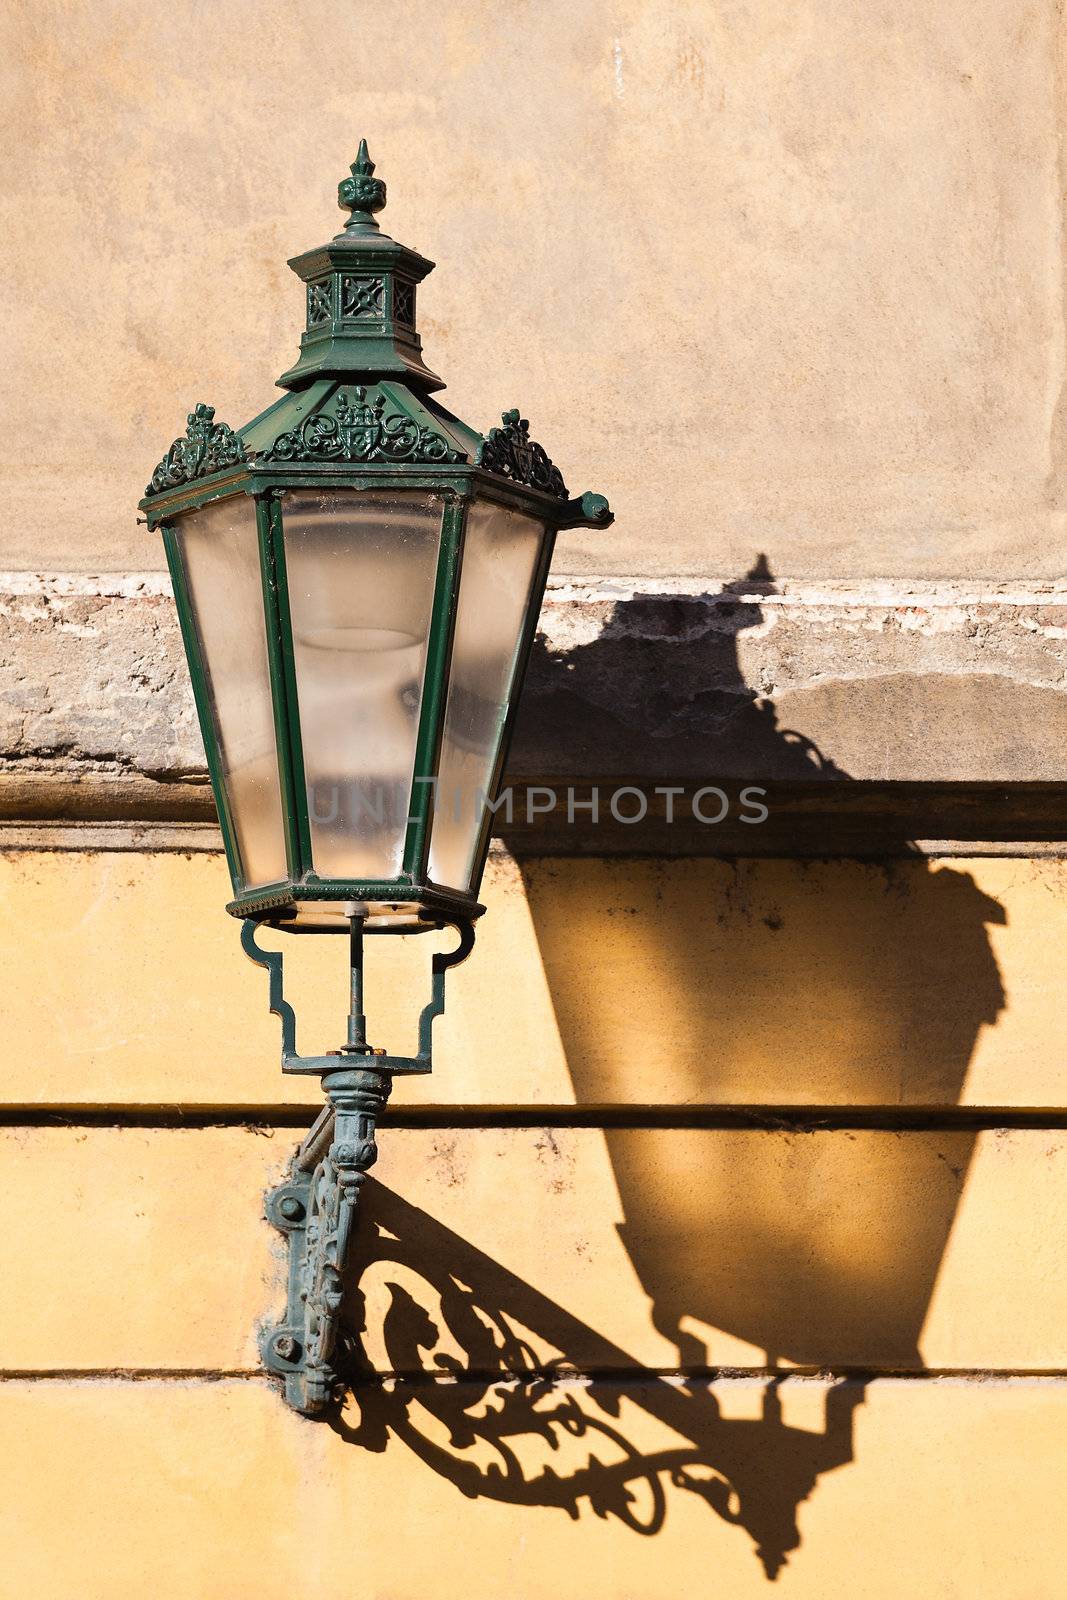 The lantern with its shadow on the yellow wall, Prague, Czech Republic